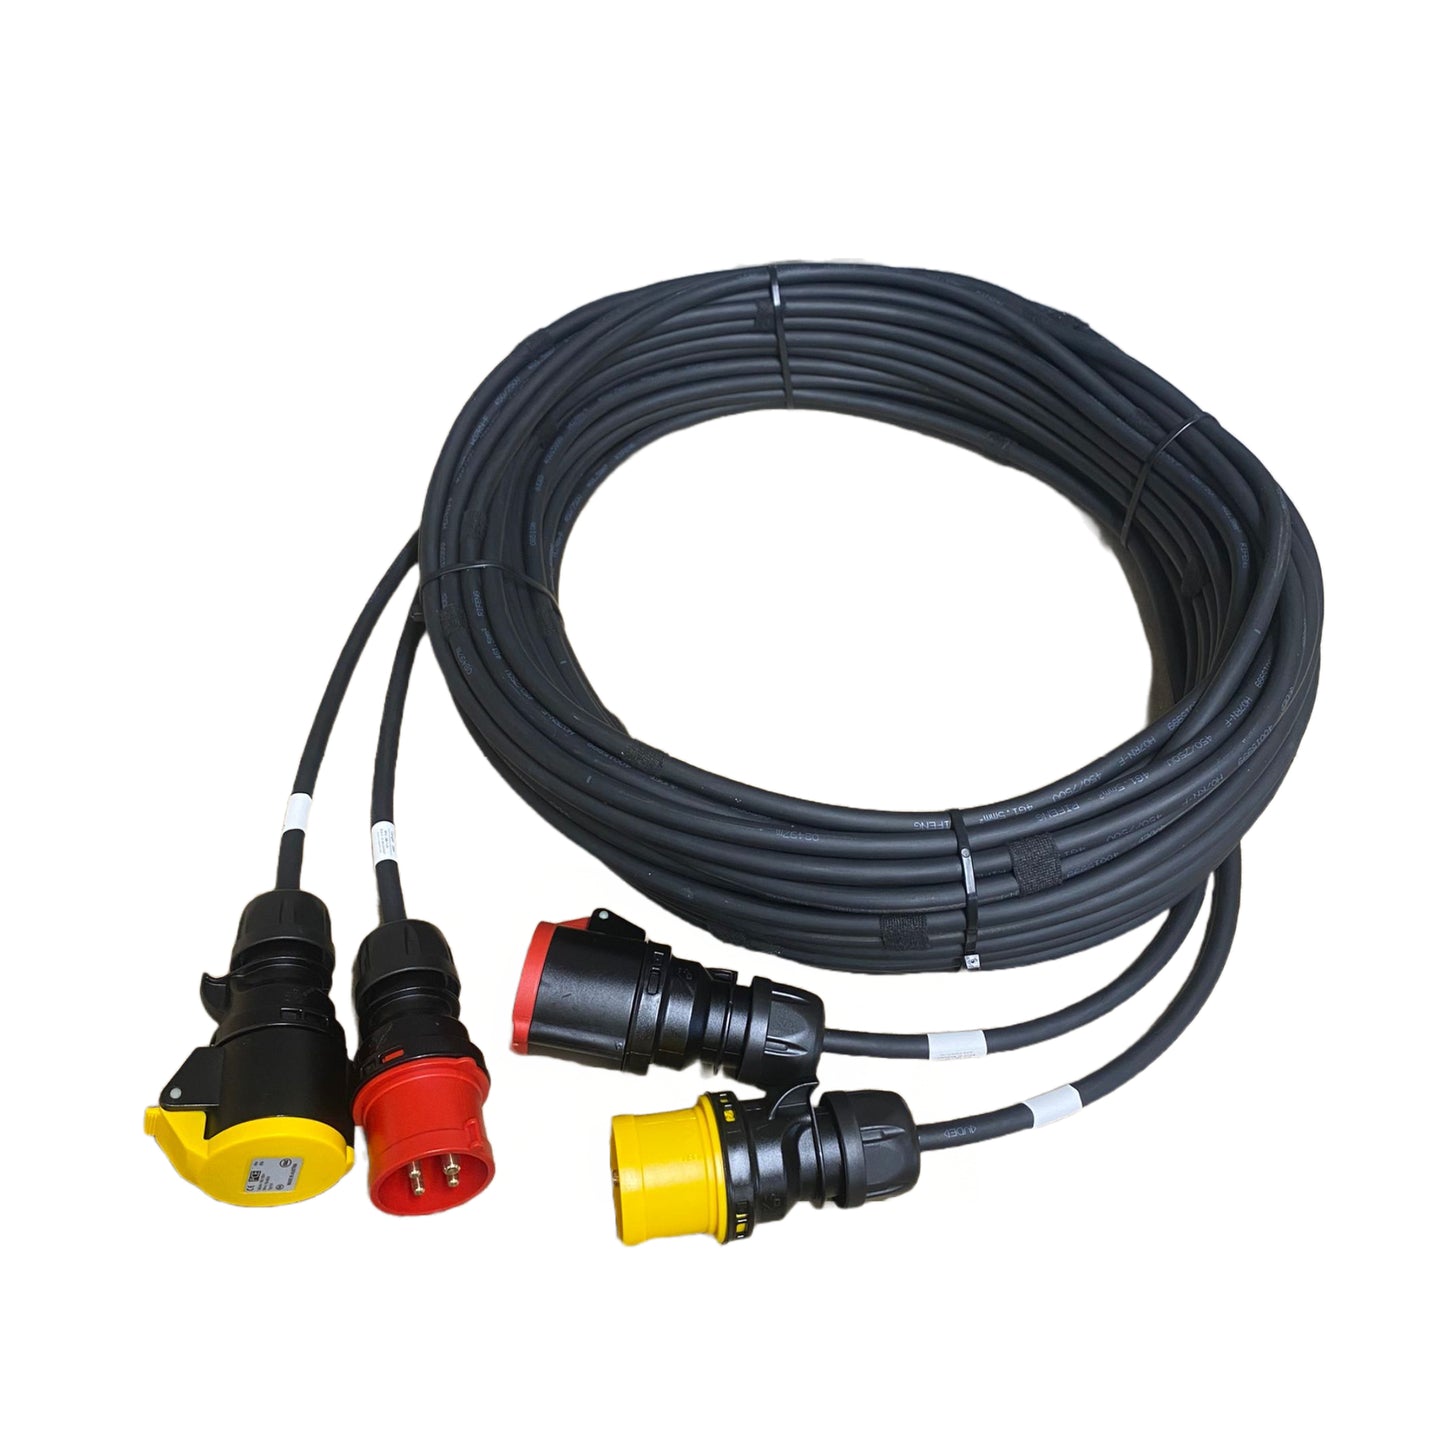 Hoist Power and Control Cable Sets